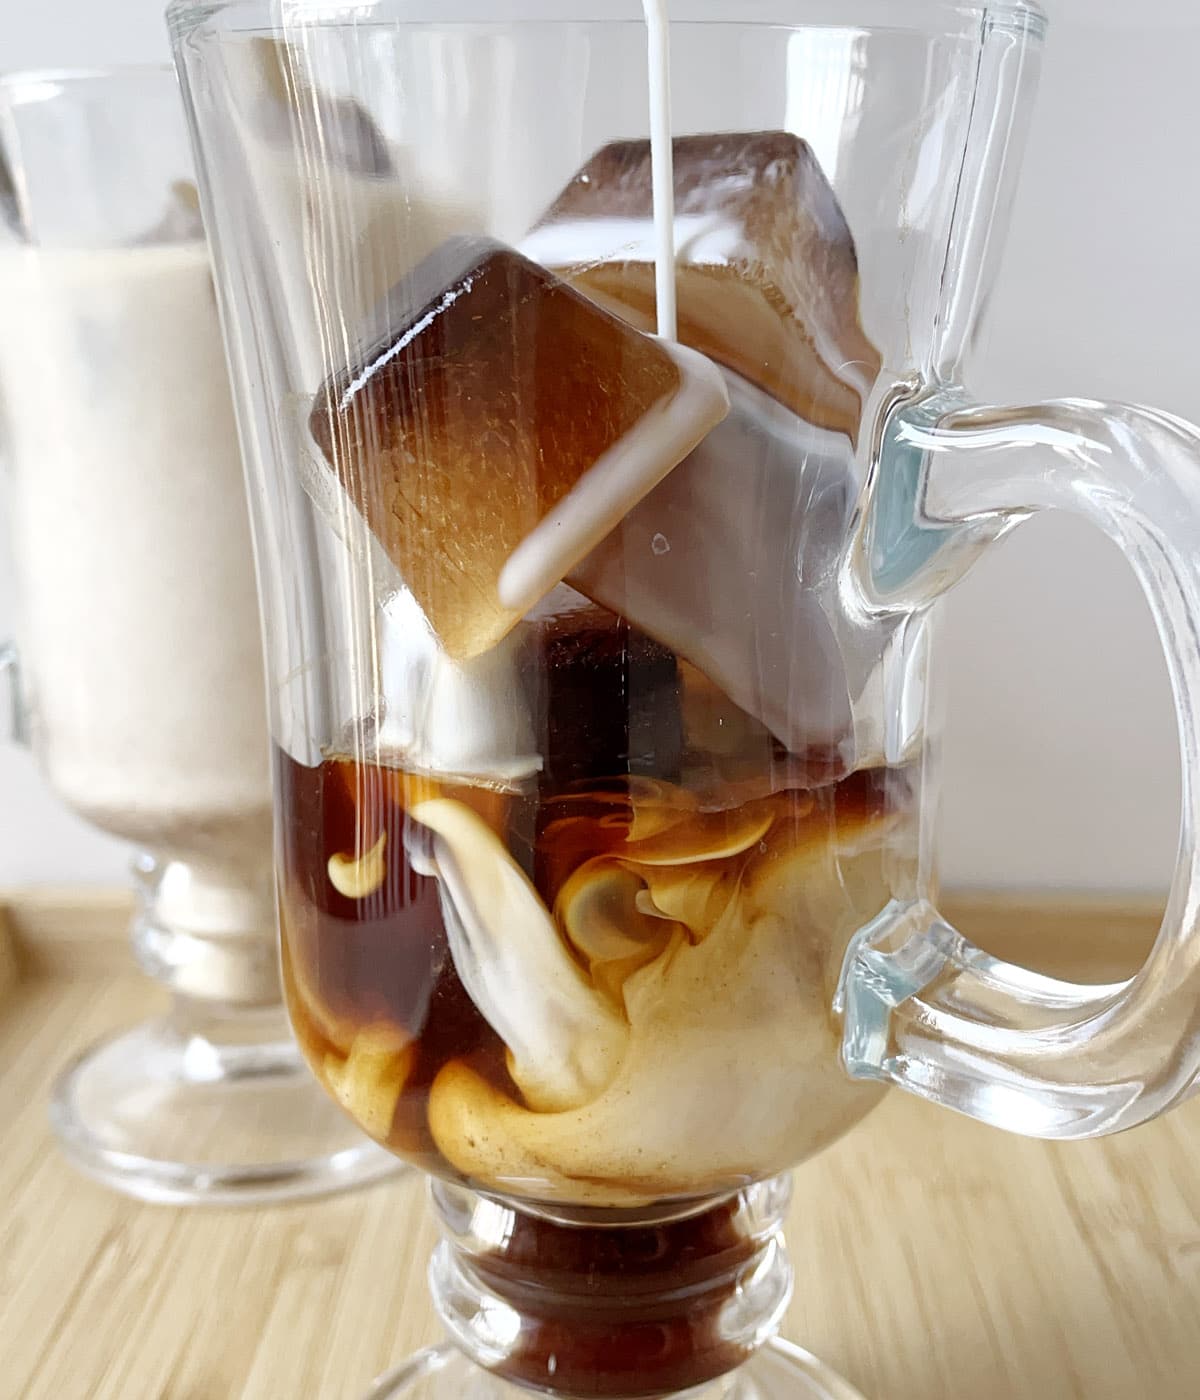 Milk being poured into a glass mug containing coffee ice cubes.